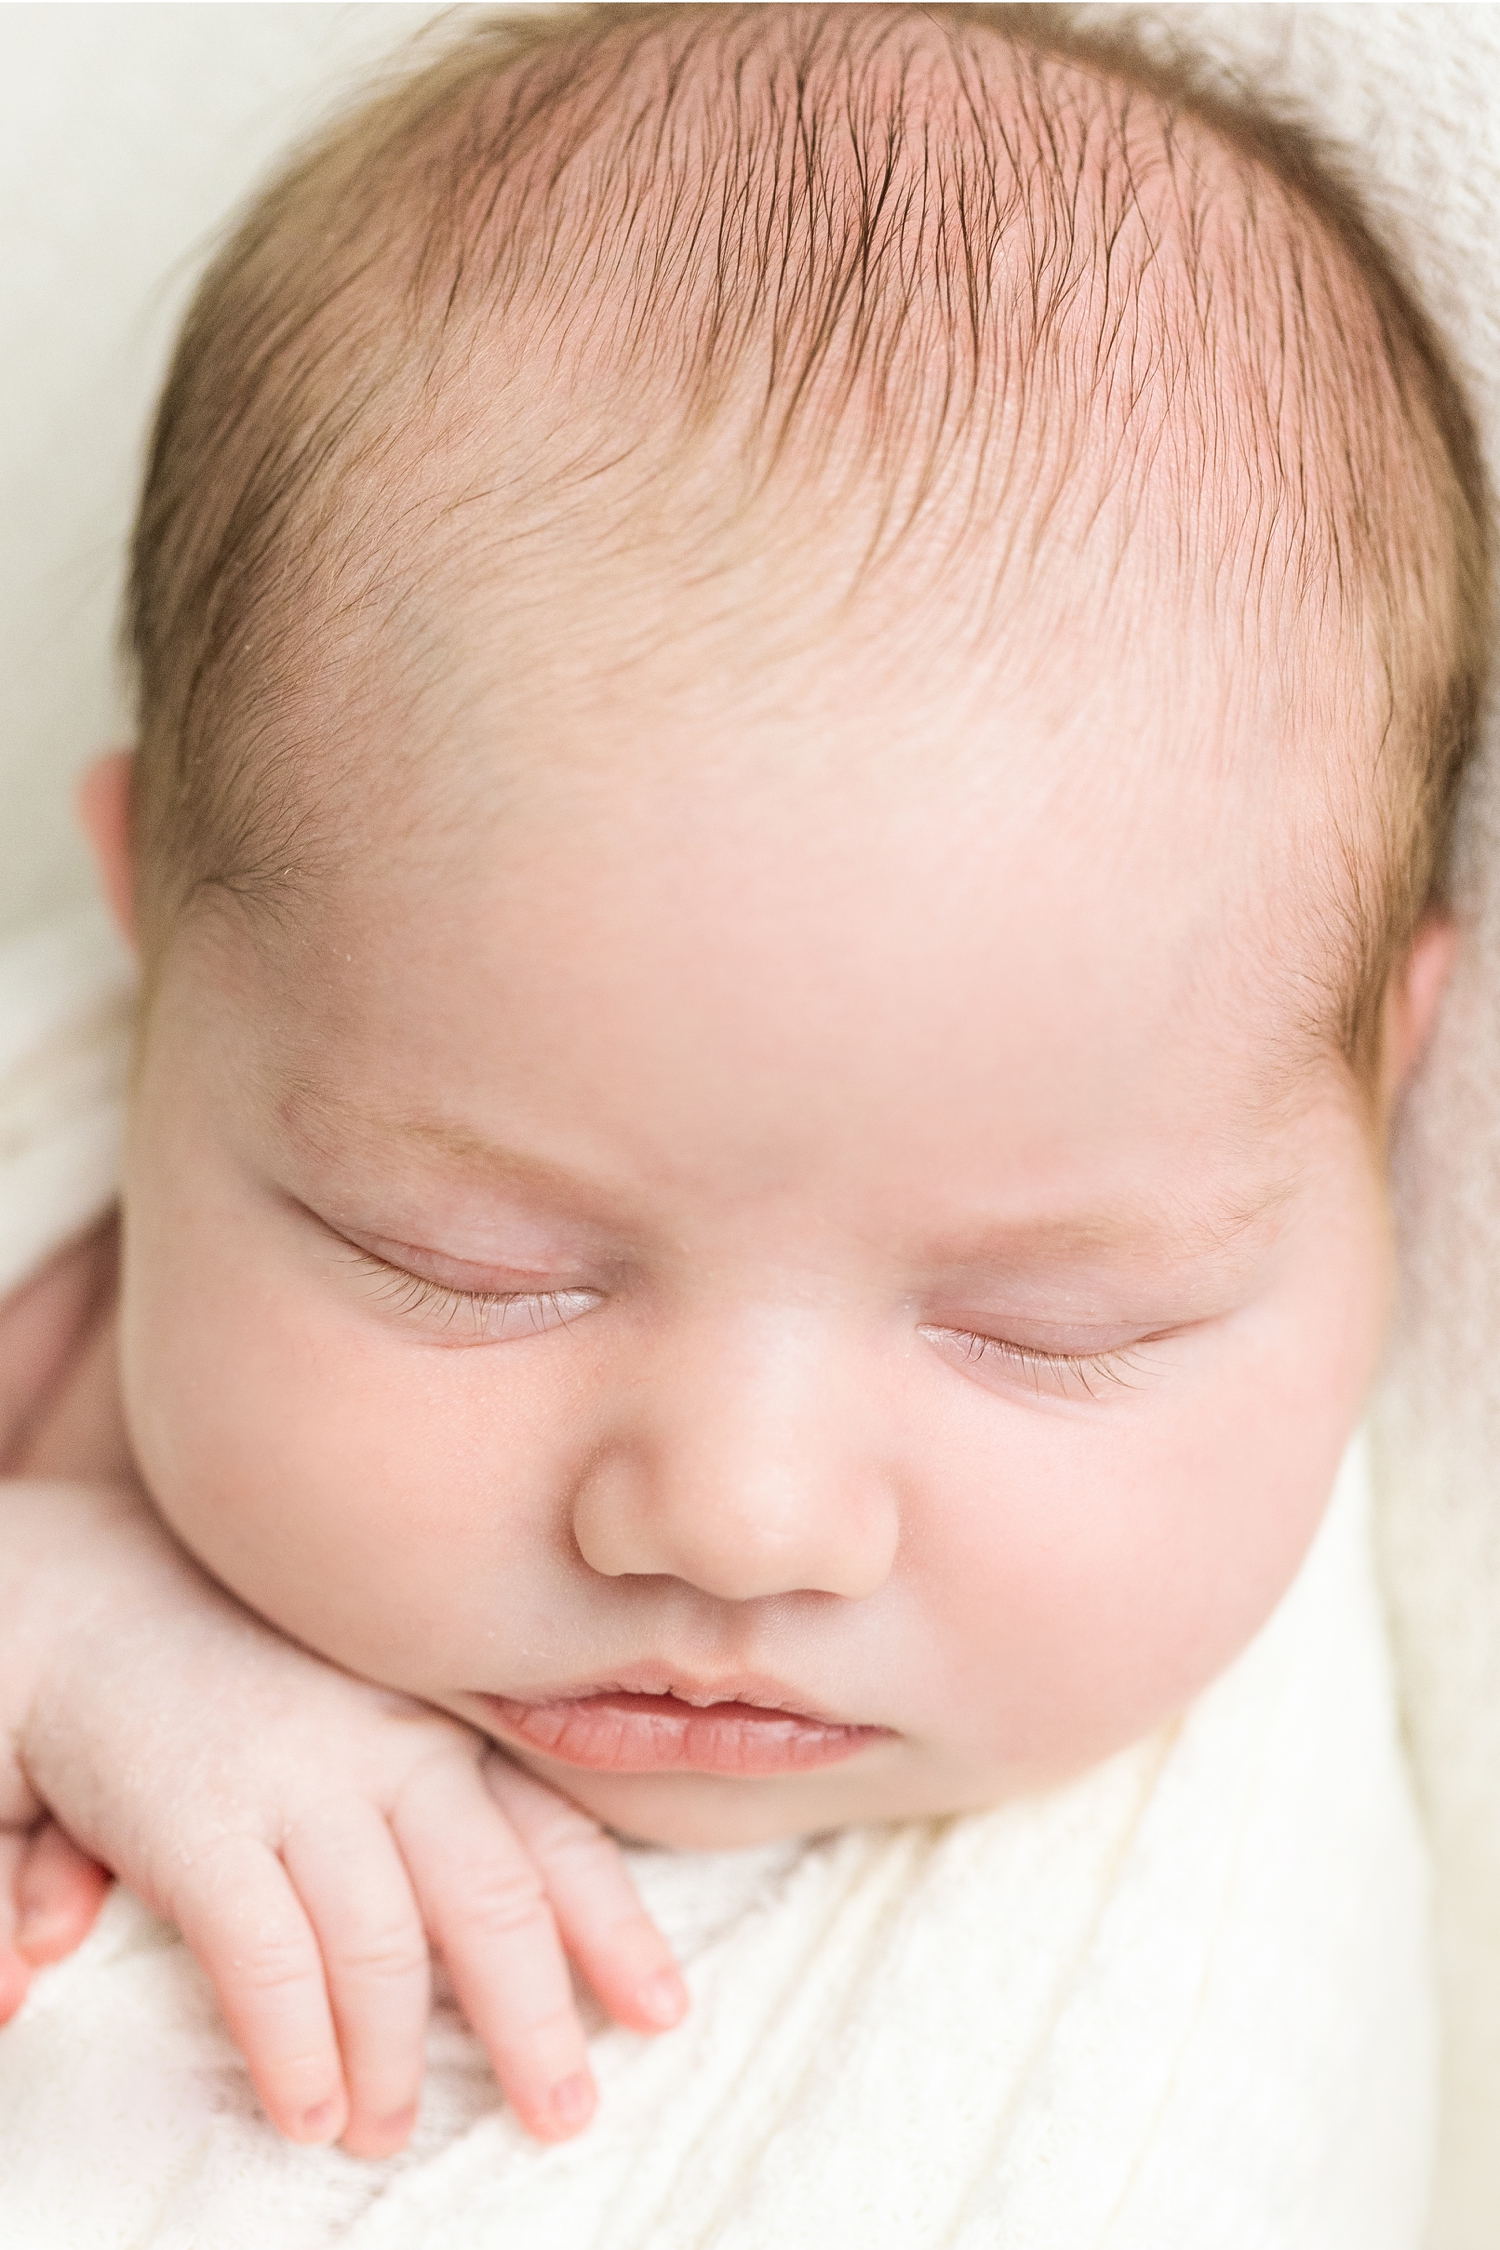 Detail image of Baby Grace's face featuring her long eyelashes | CB Studio